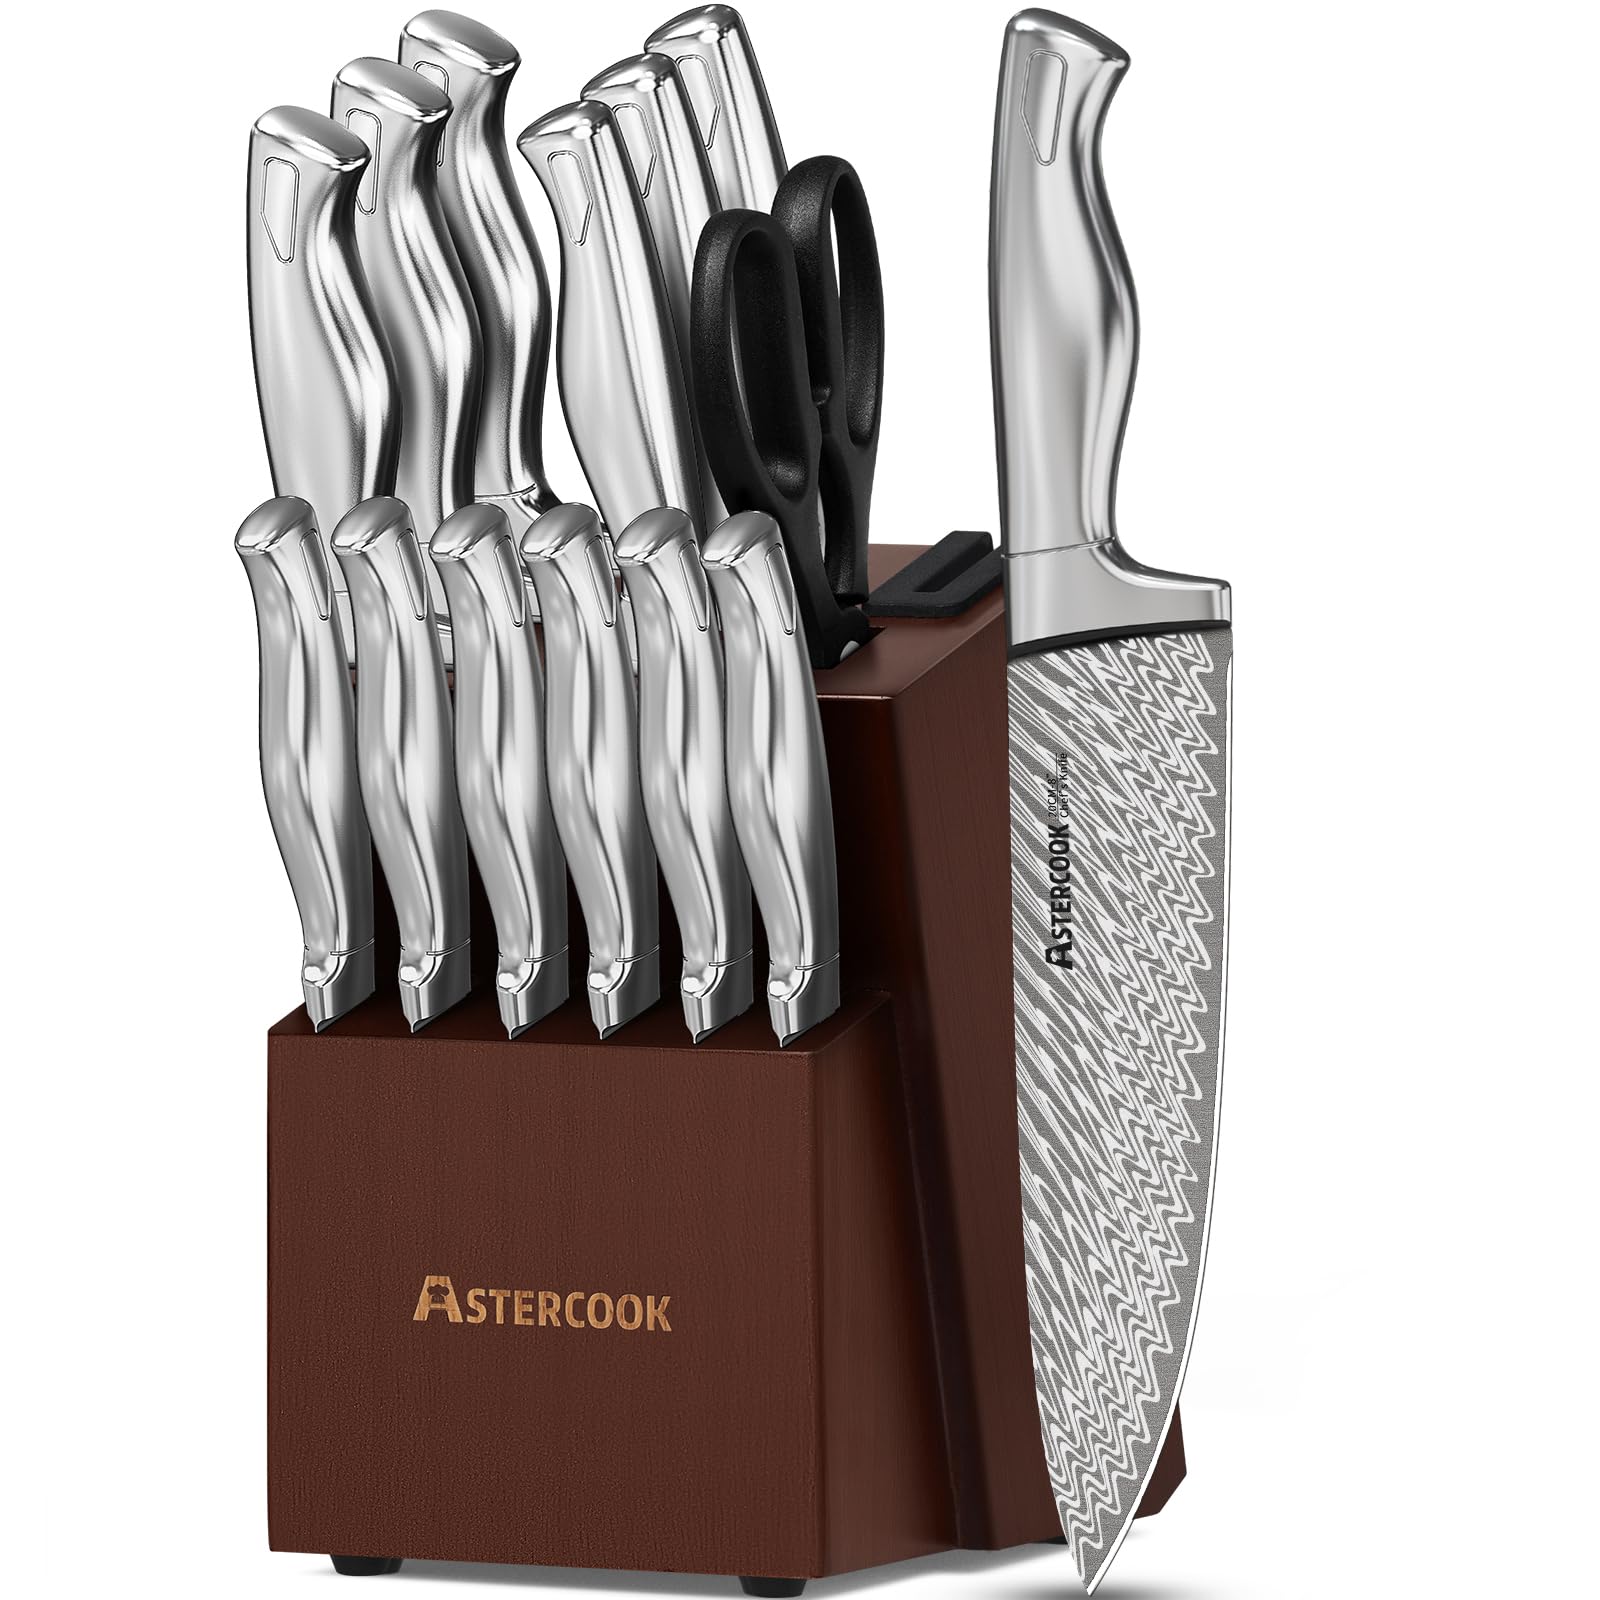 Ginsu Kiso Dishwasher Safe Black 18 Piece Knife Set - Stainless Steel Blades,  Scalloped Serration, No Sharpening Needed, Wood Block Included in the  Cutlery department at